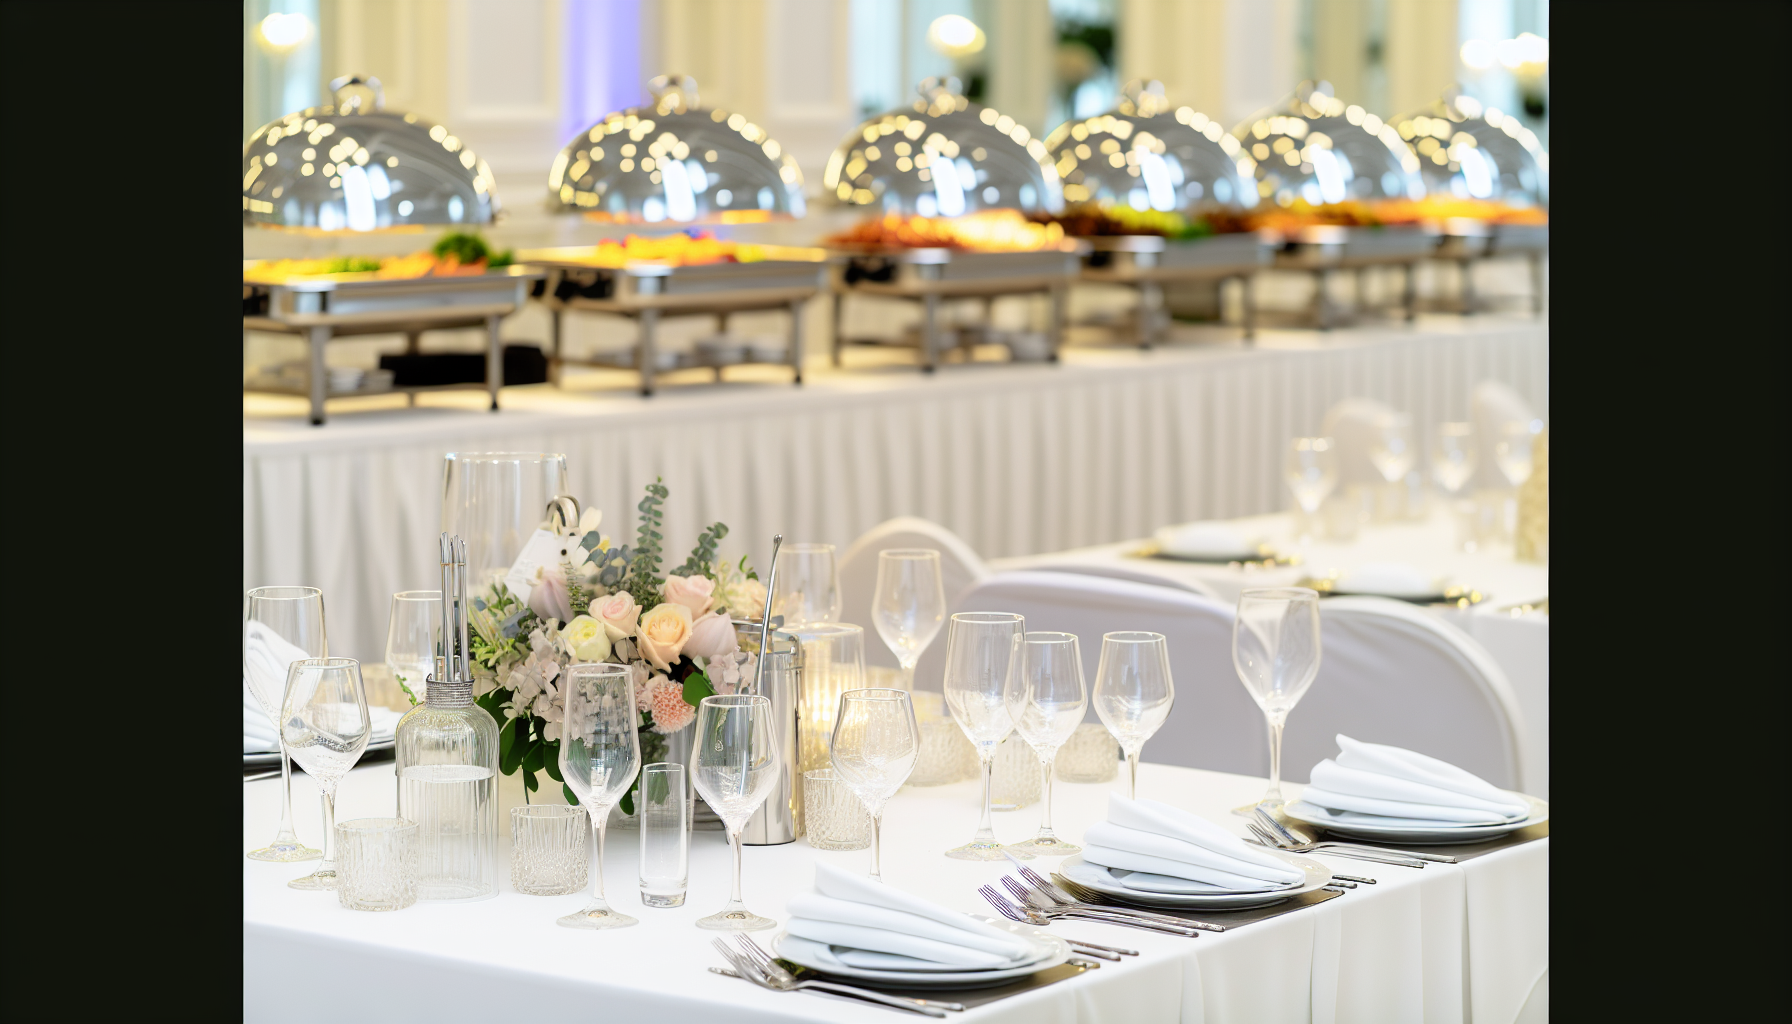 Choosing the Right Catering Style for Your Event